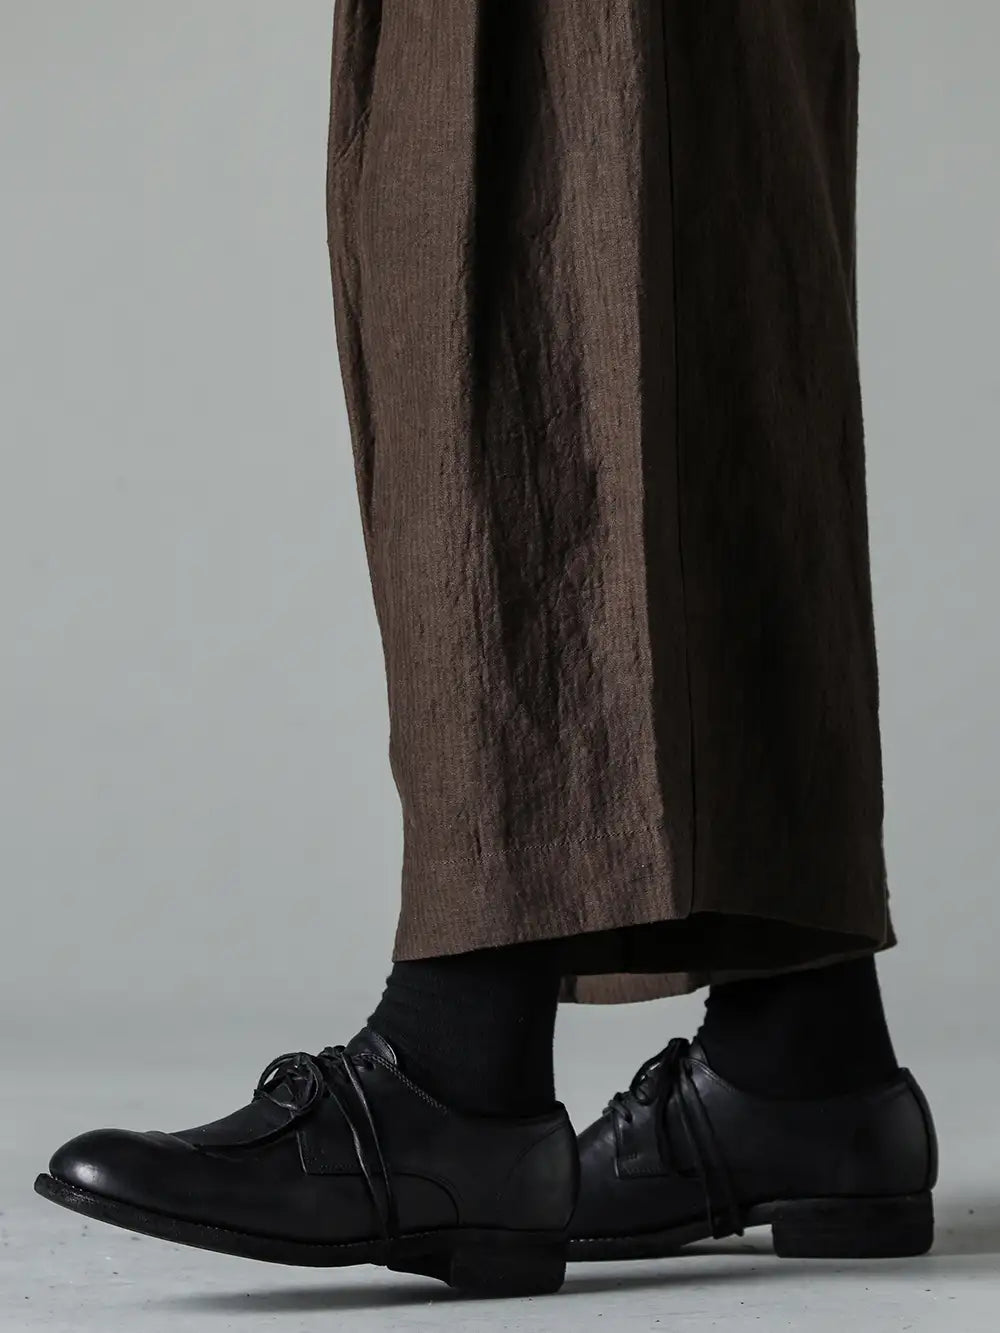 ZIGGY CHEN 24SS - Comfortable, casual fashion in a fashionable way - 0M2410509 Pleated Extra Wide Leg Trousers - 992x-black-guidi Classic Derby Shoes Laced Up Single Sole - Horse Full Grain - 992X Black 3-006